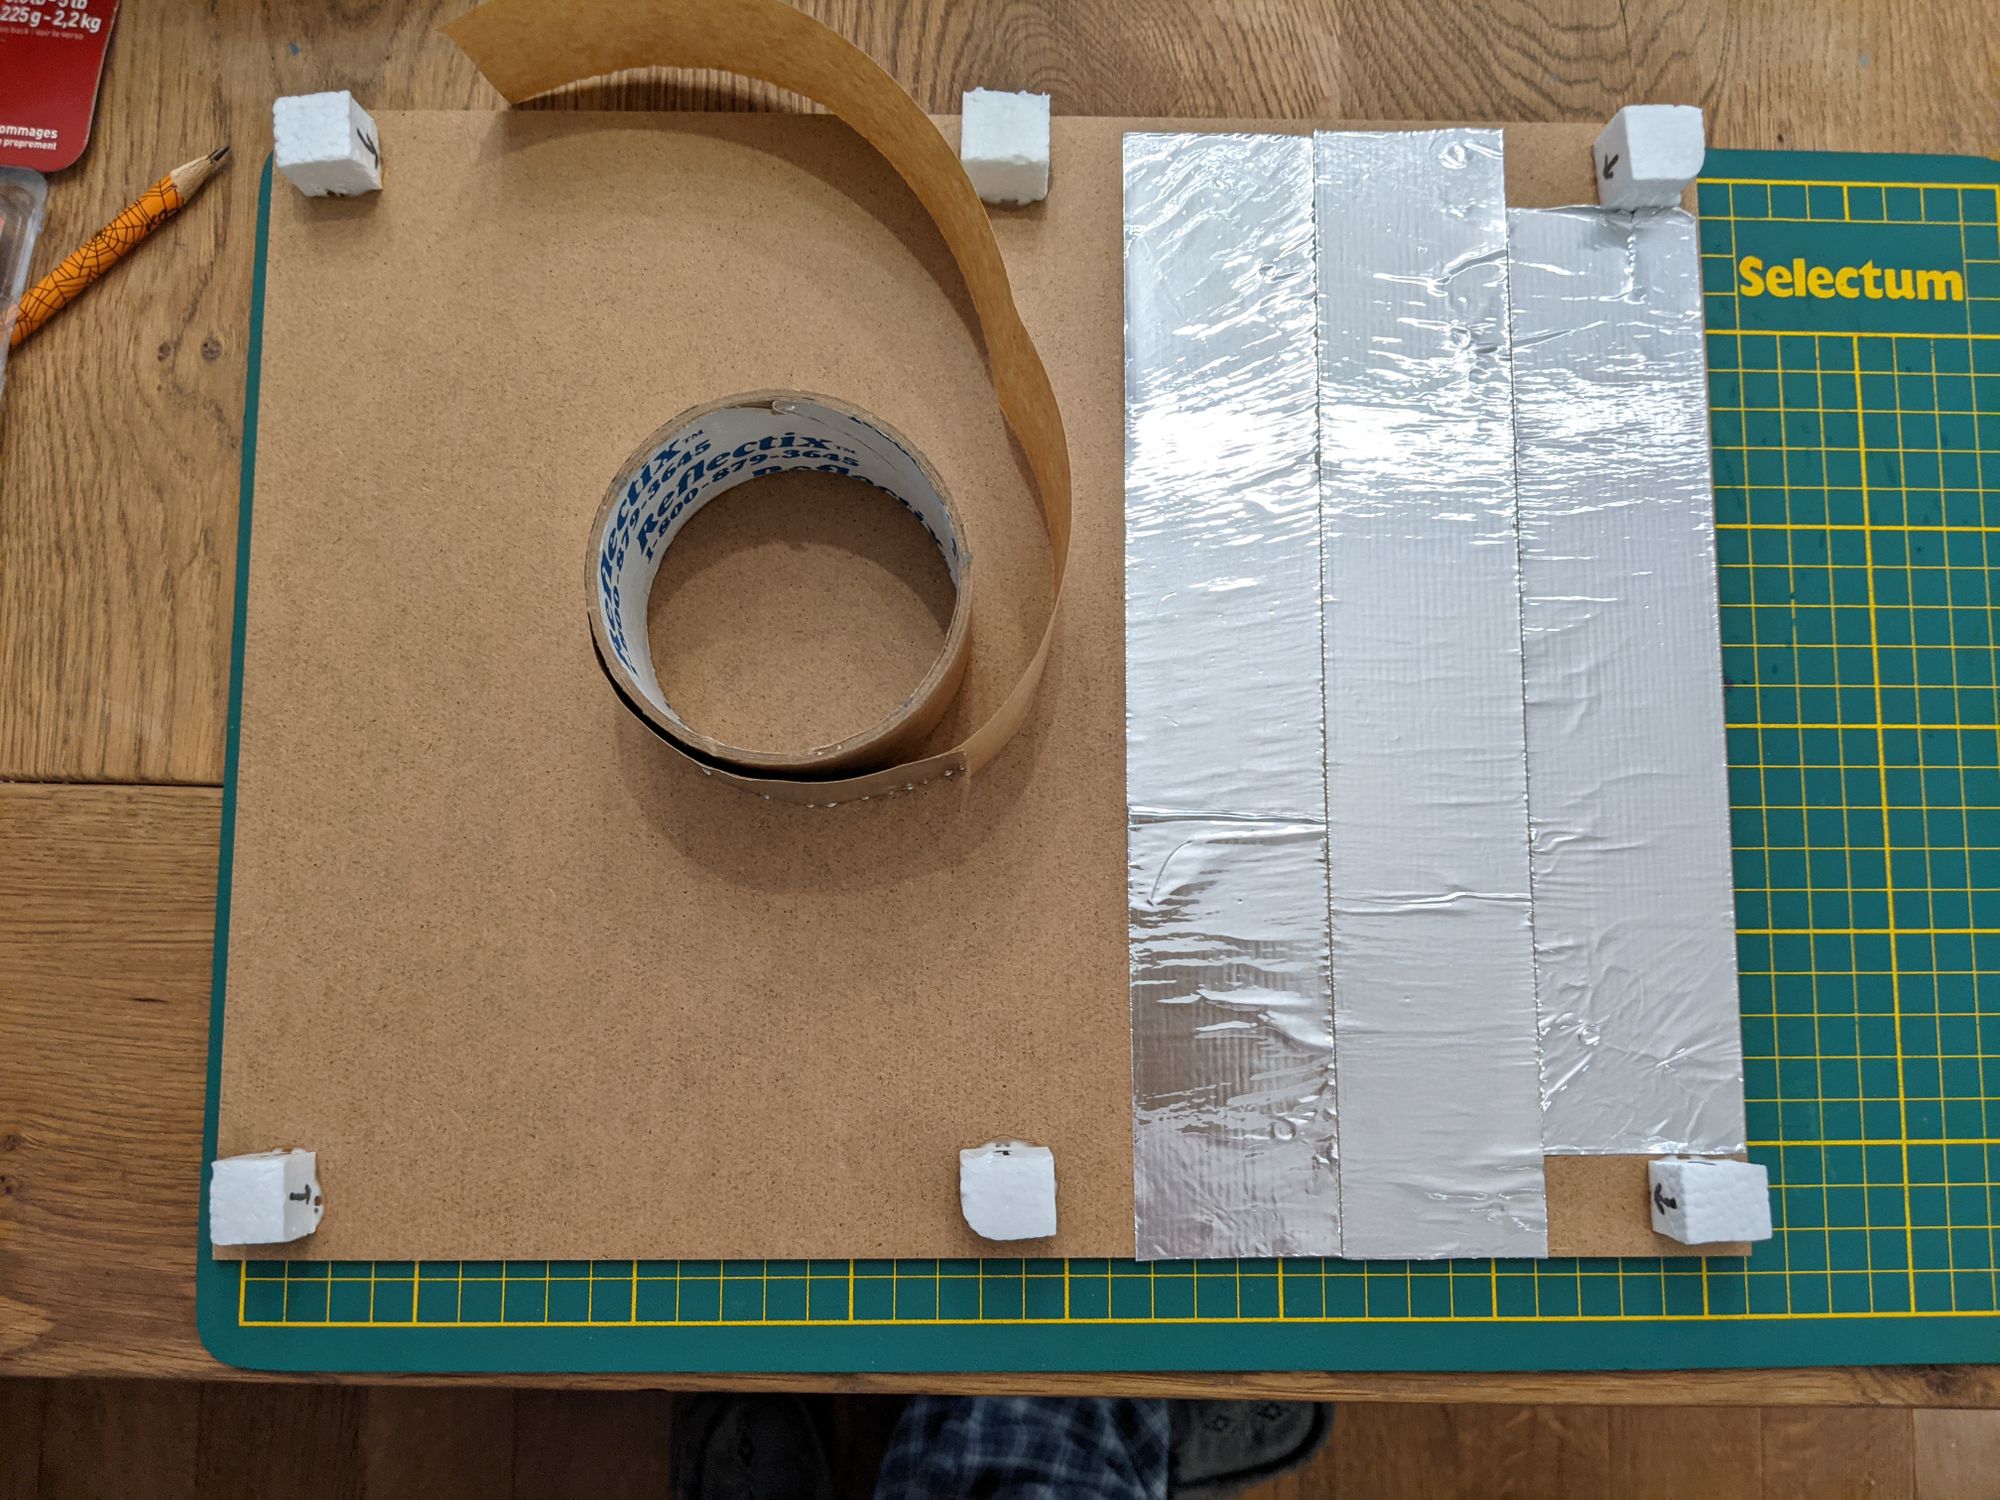 Backing board with styrofoam spacers and foil tape on a cutting mat. There is a roll of foil tape on top.